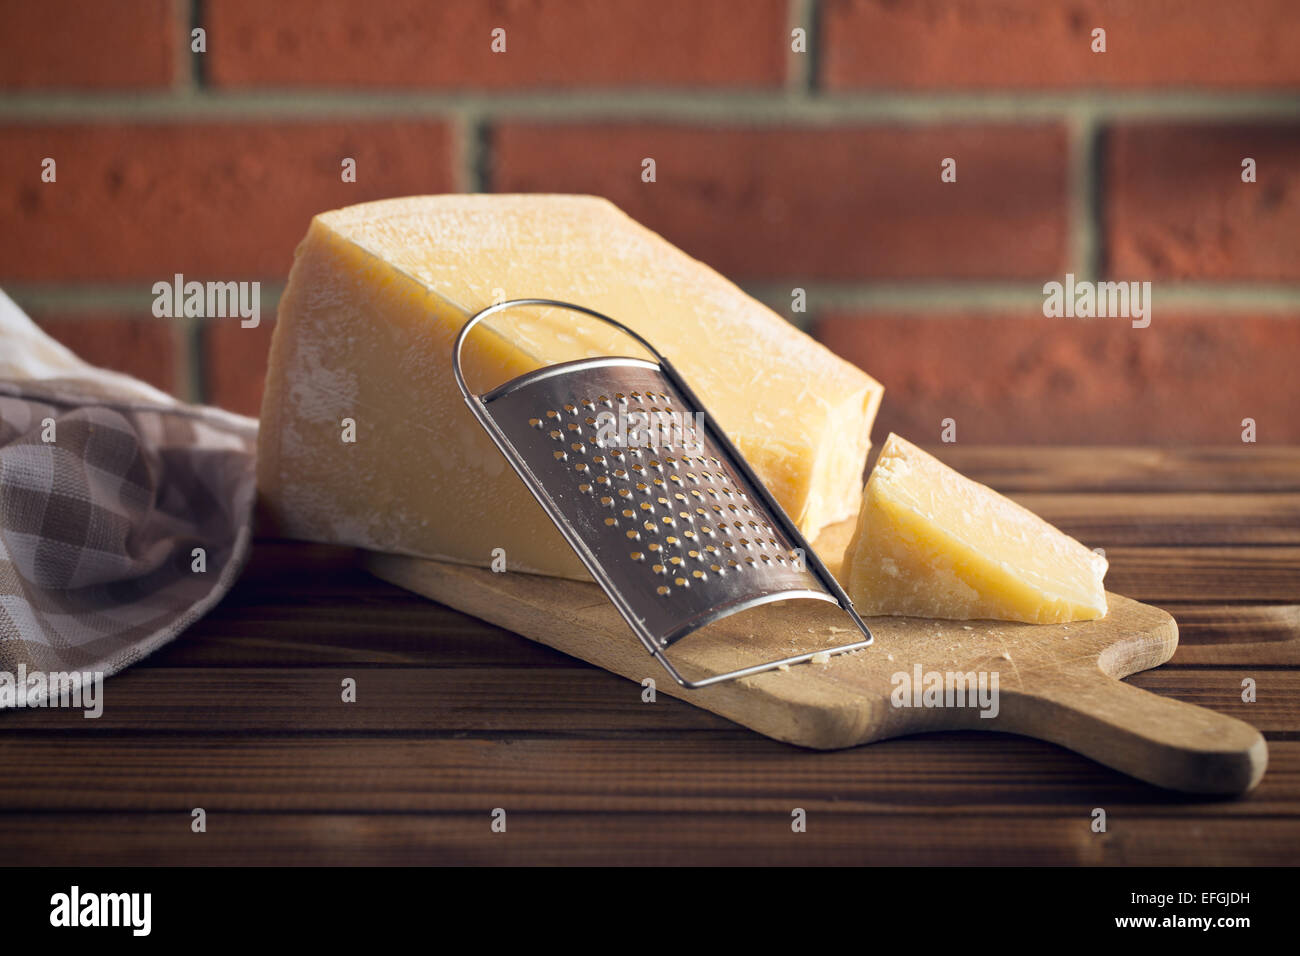 https://c8.alamy.com/comp/EFGJDH/the-cheese-grater-and-parmesan-EFGJDH.jpg